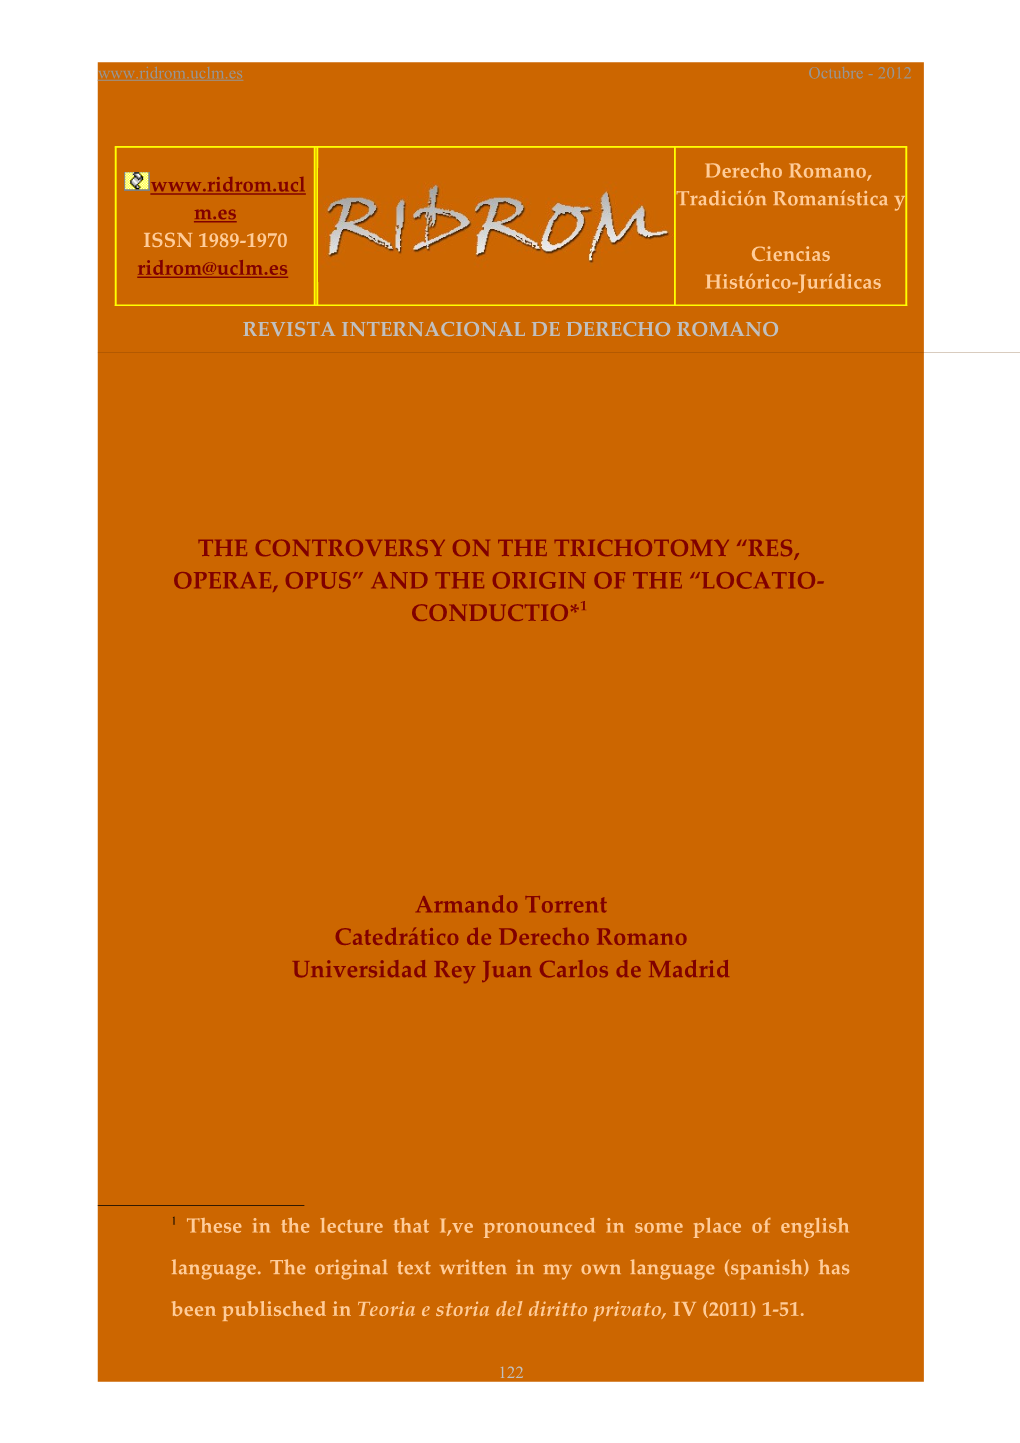 The Controversy on the Trichotomy Res, Operae, Opus and the Origin of the Locatio-Conductio